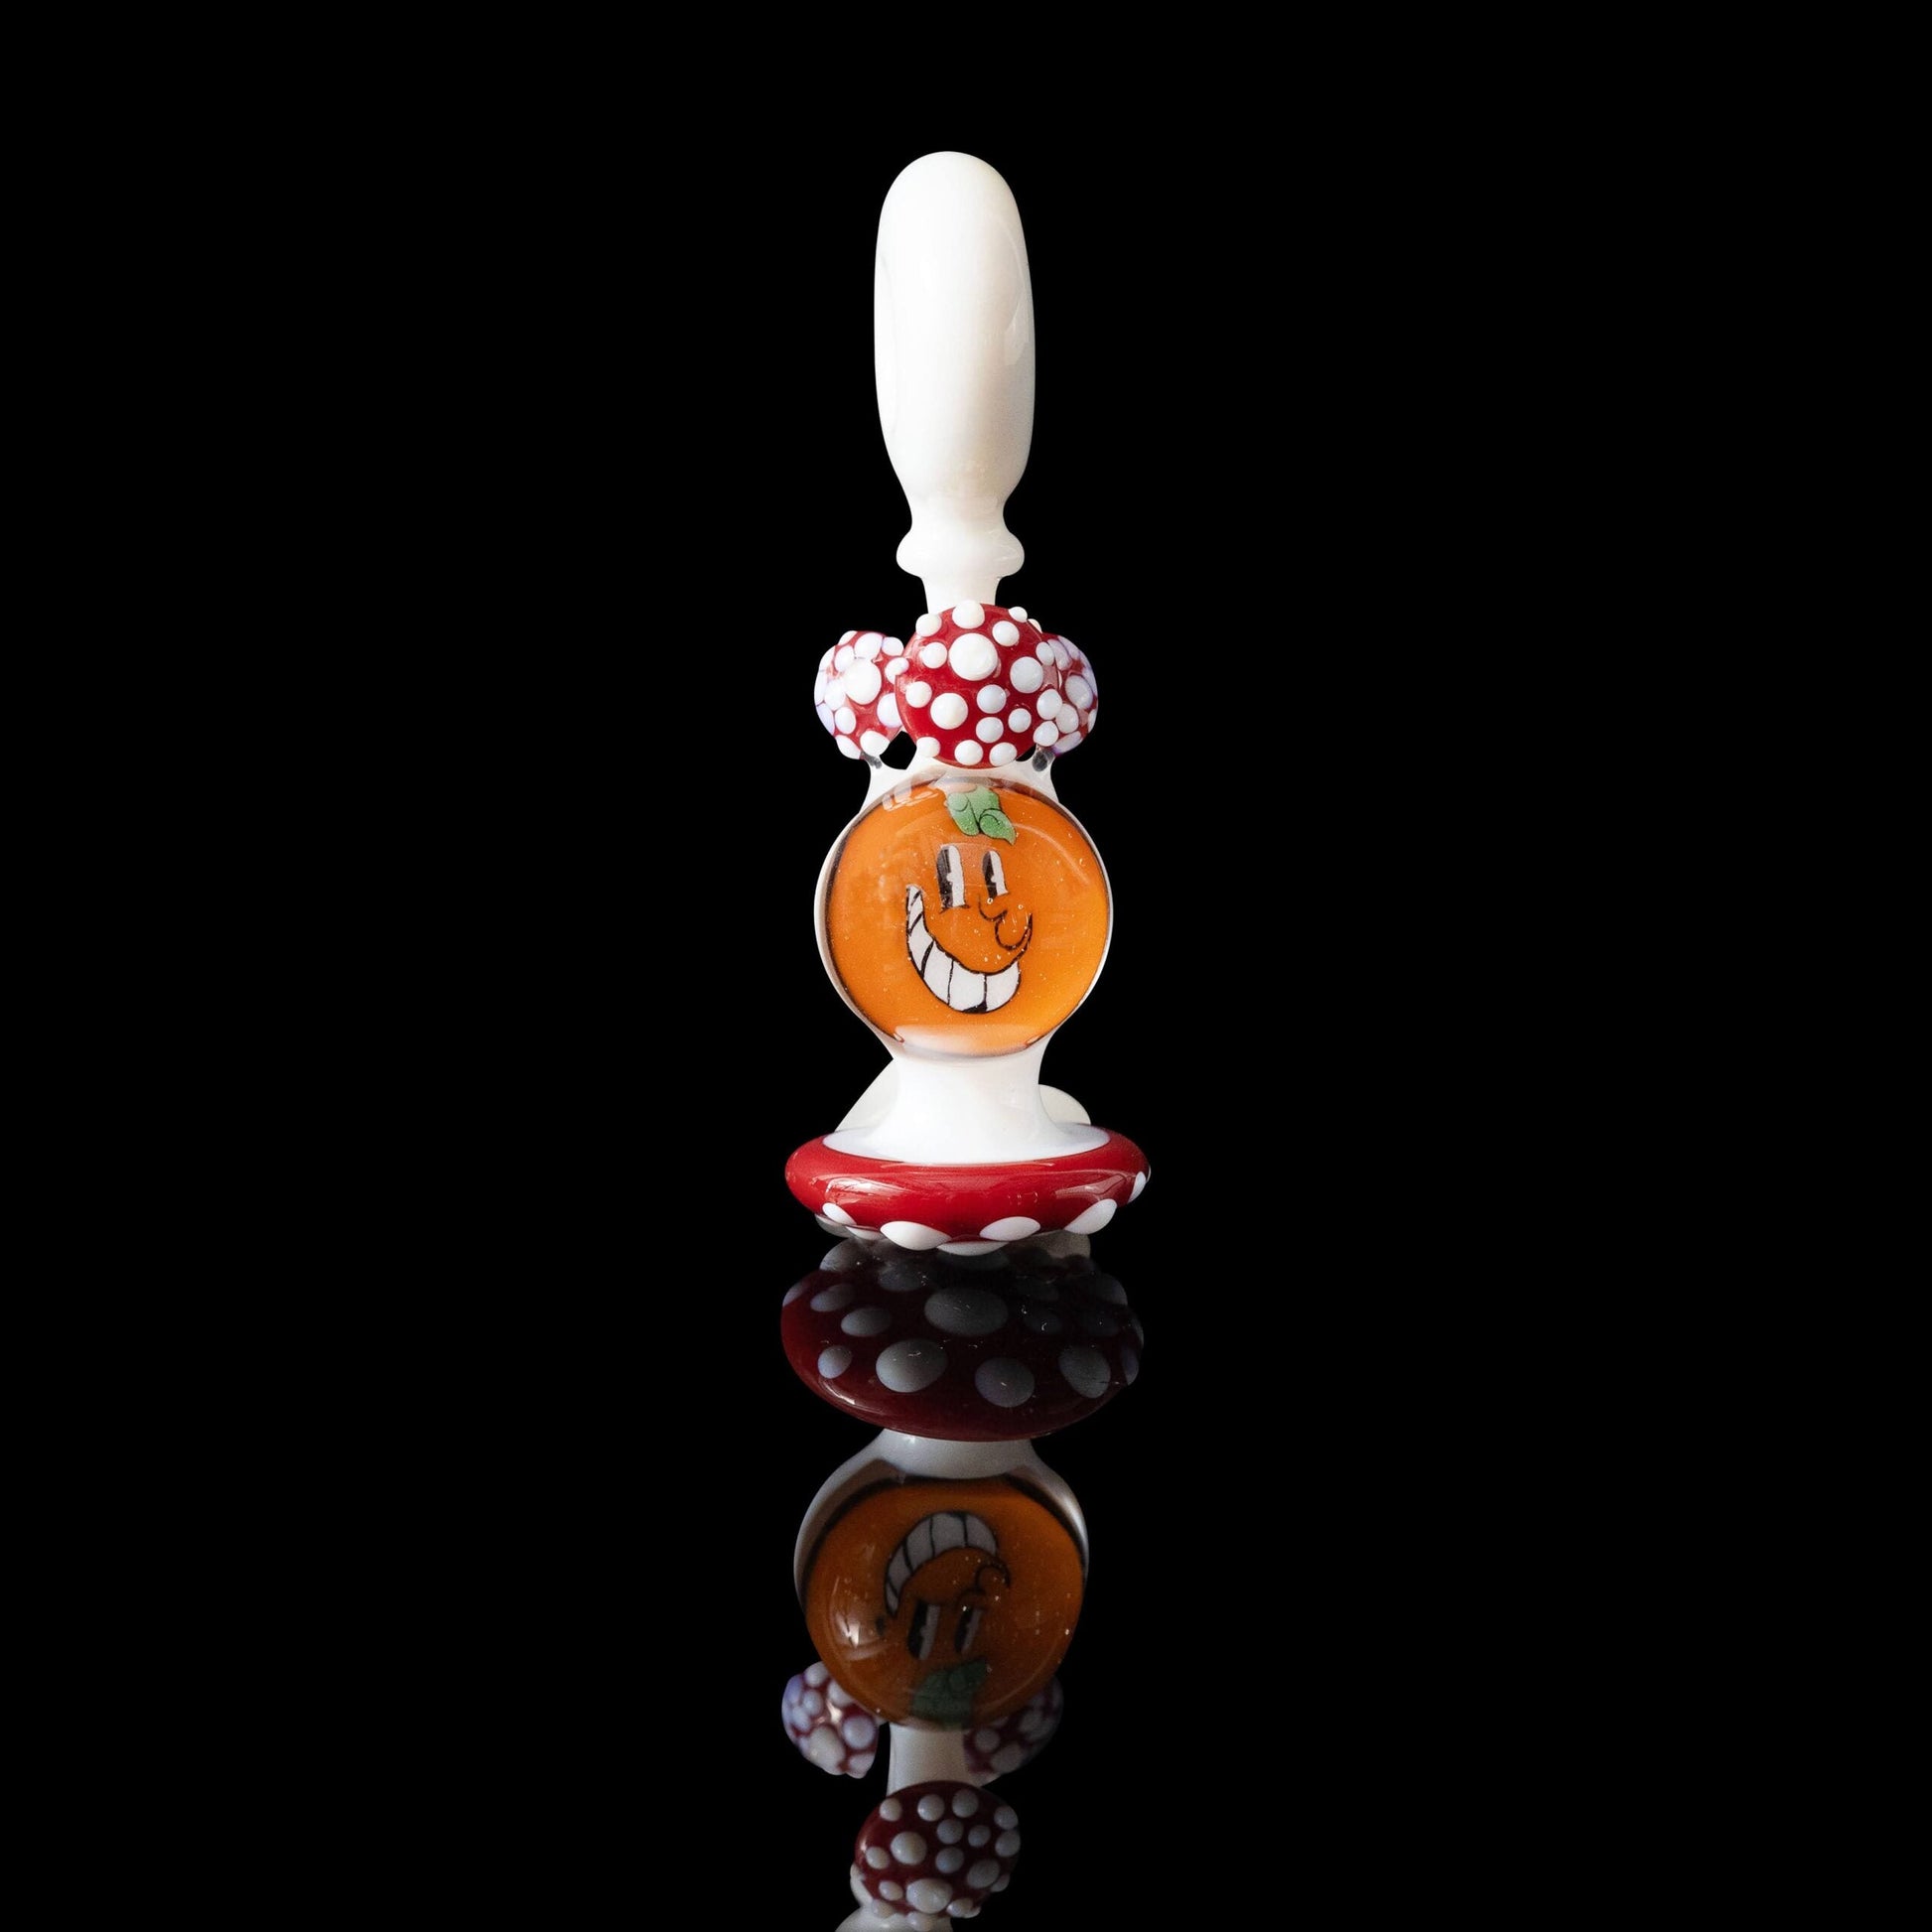 meticulously crafted glass pendant - Snic Barnes x Atomik x Groe Pendant (Got the Juice Vol. 2)